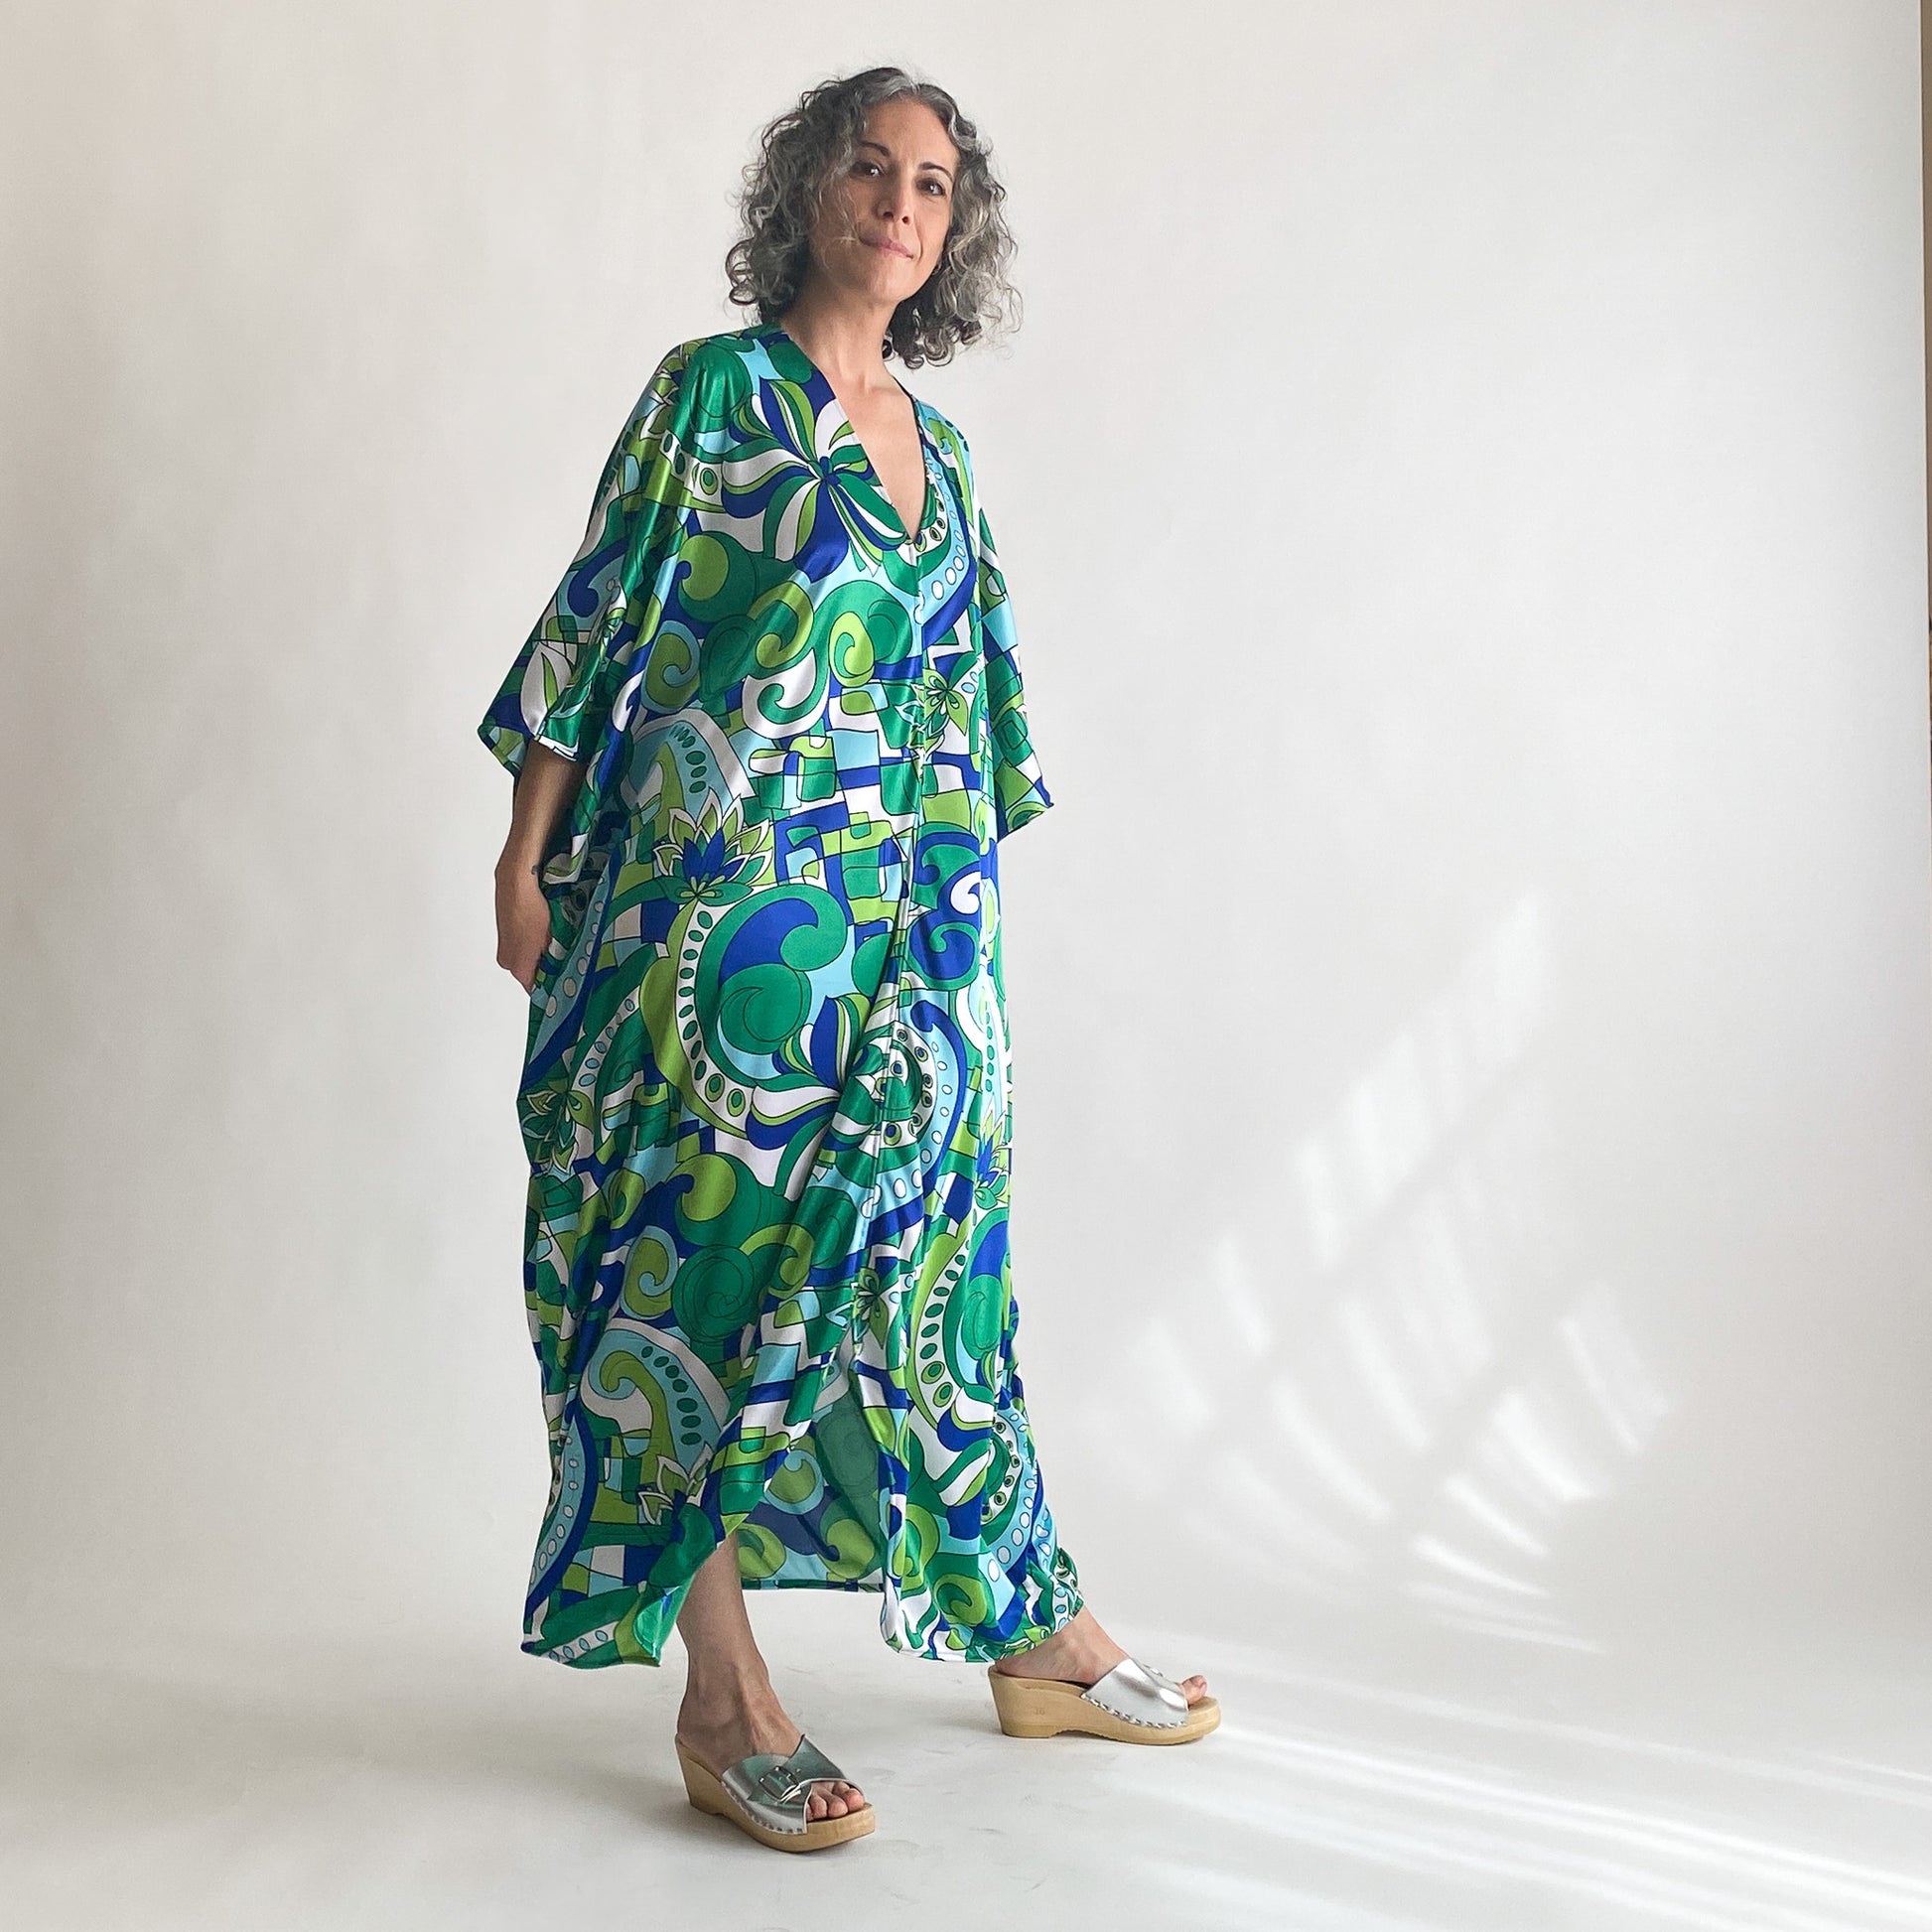 House of Lu Diana Caftan in Color Number 46. A vintage psychedelic blue and green print made of vintage acetate fabric. Perfectly draped and perfectly packable. Only five available. 